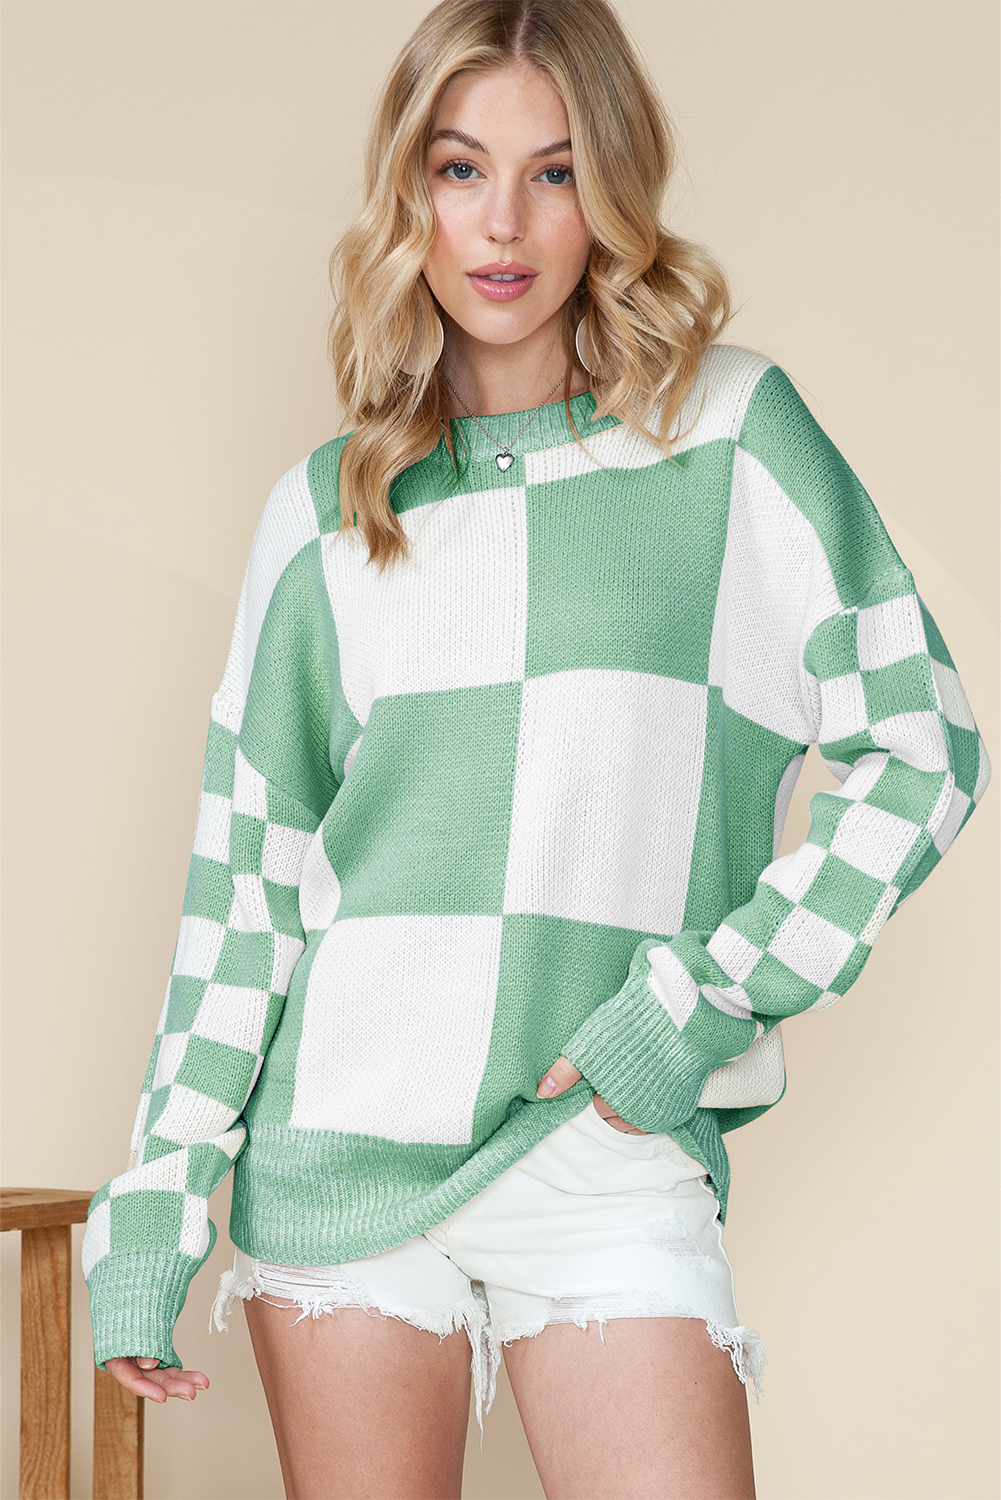 Shewin Wholesale Southern Clothes Mint Green Plaid Knitted Drop Shoulder SWEATER